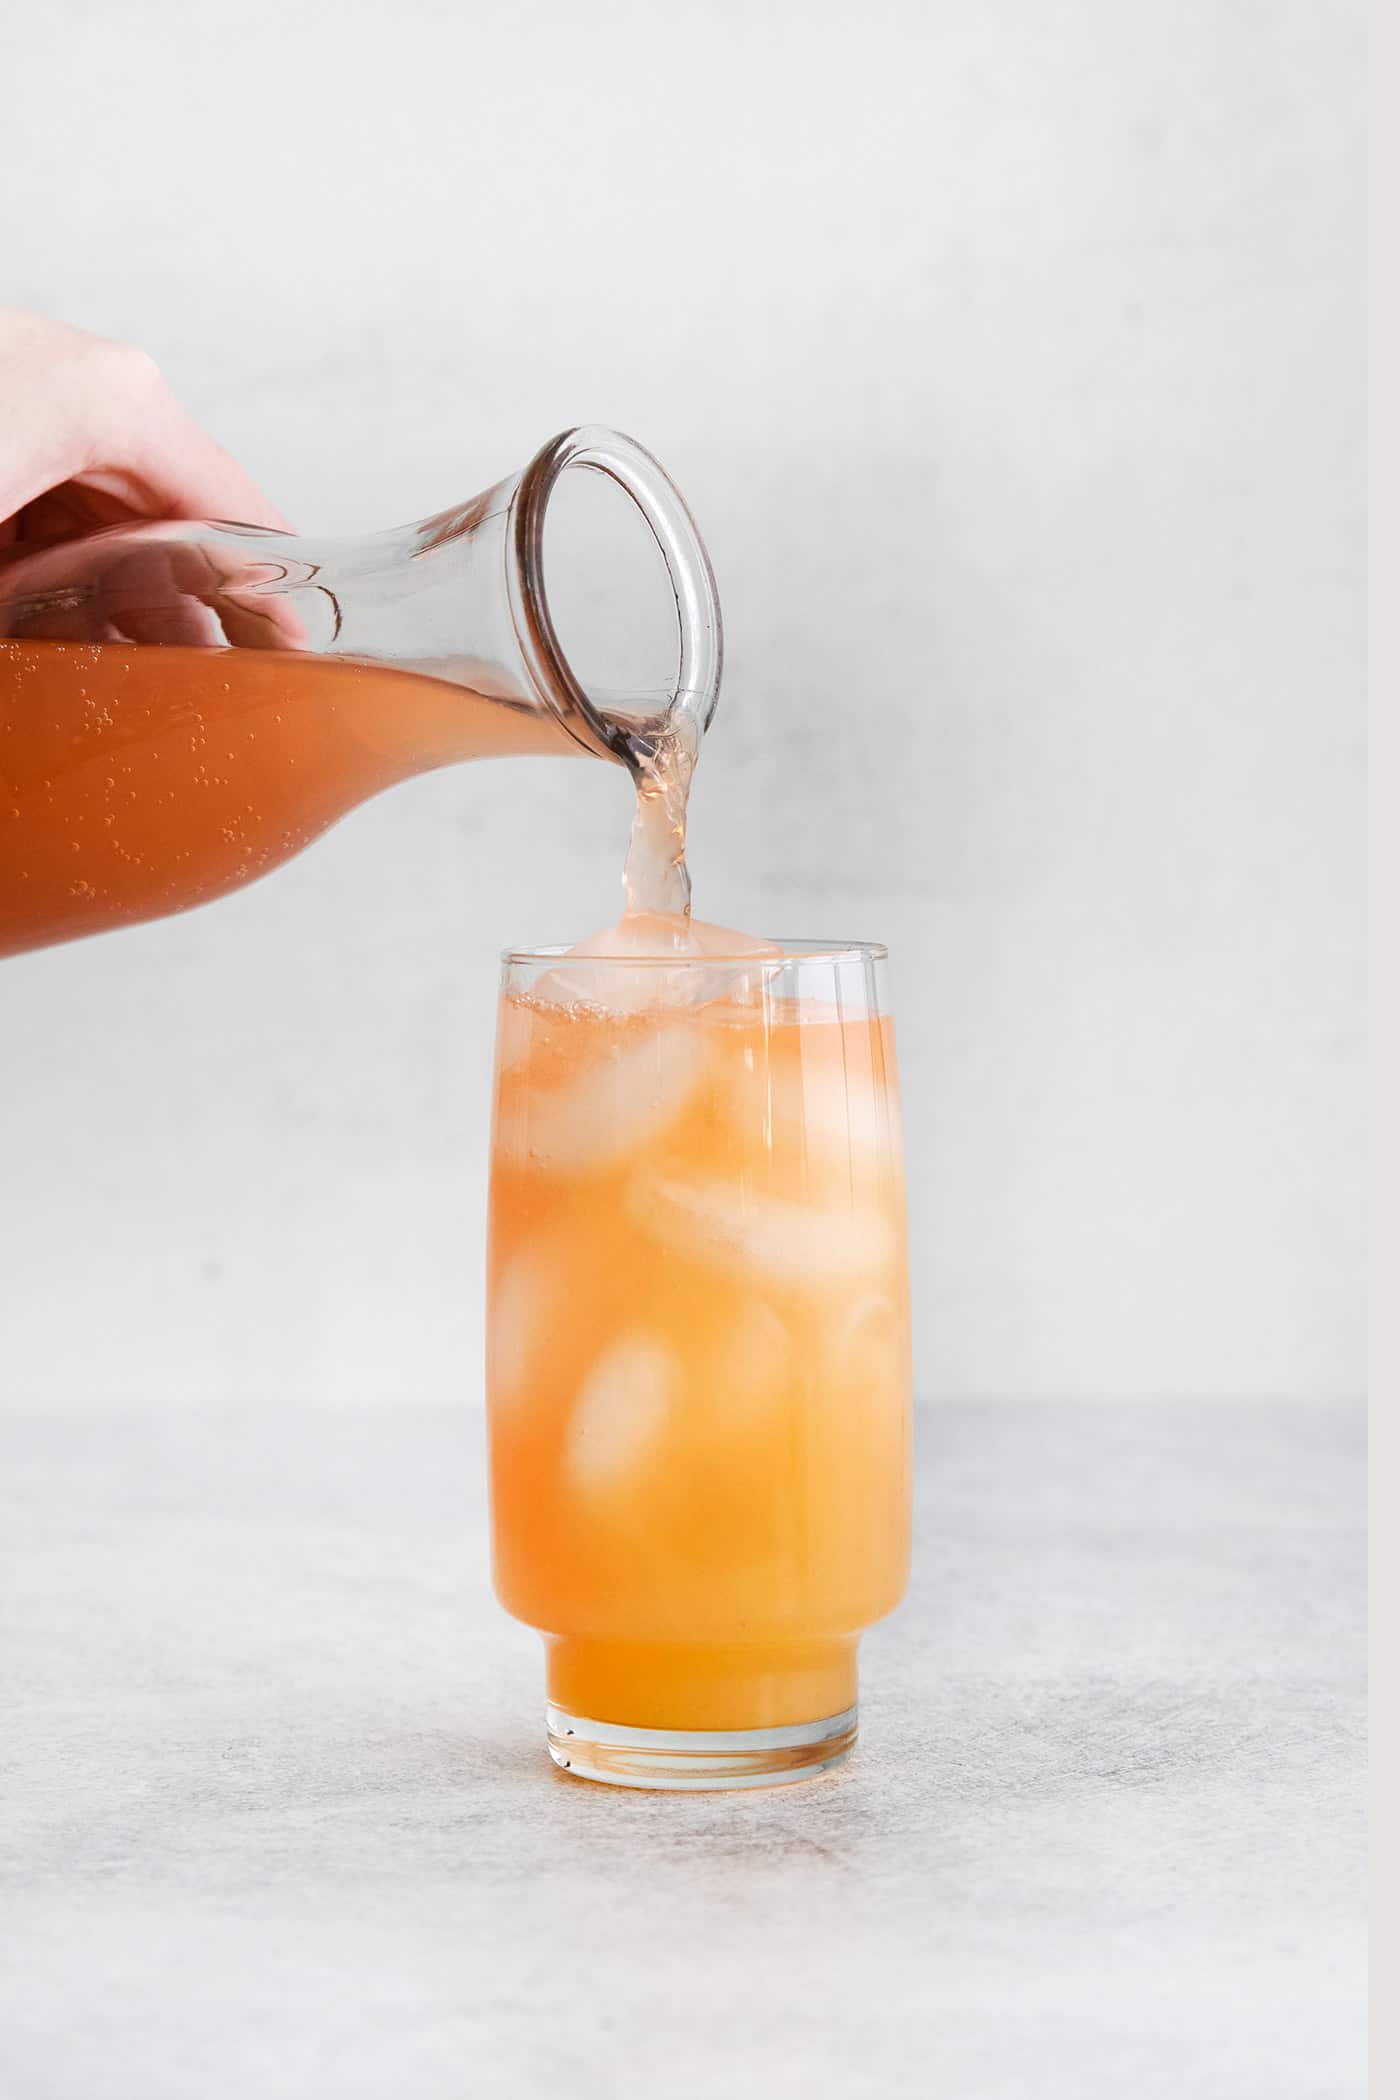 Grapefruit soda being added to a glass with tequila juices and ice